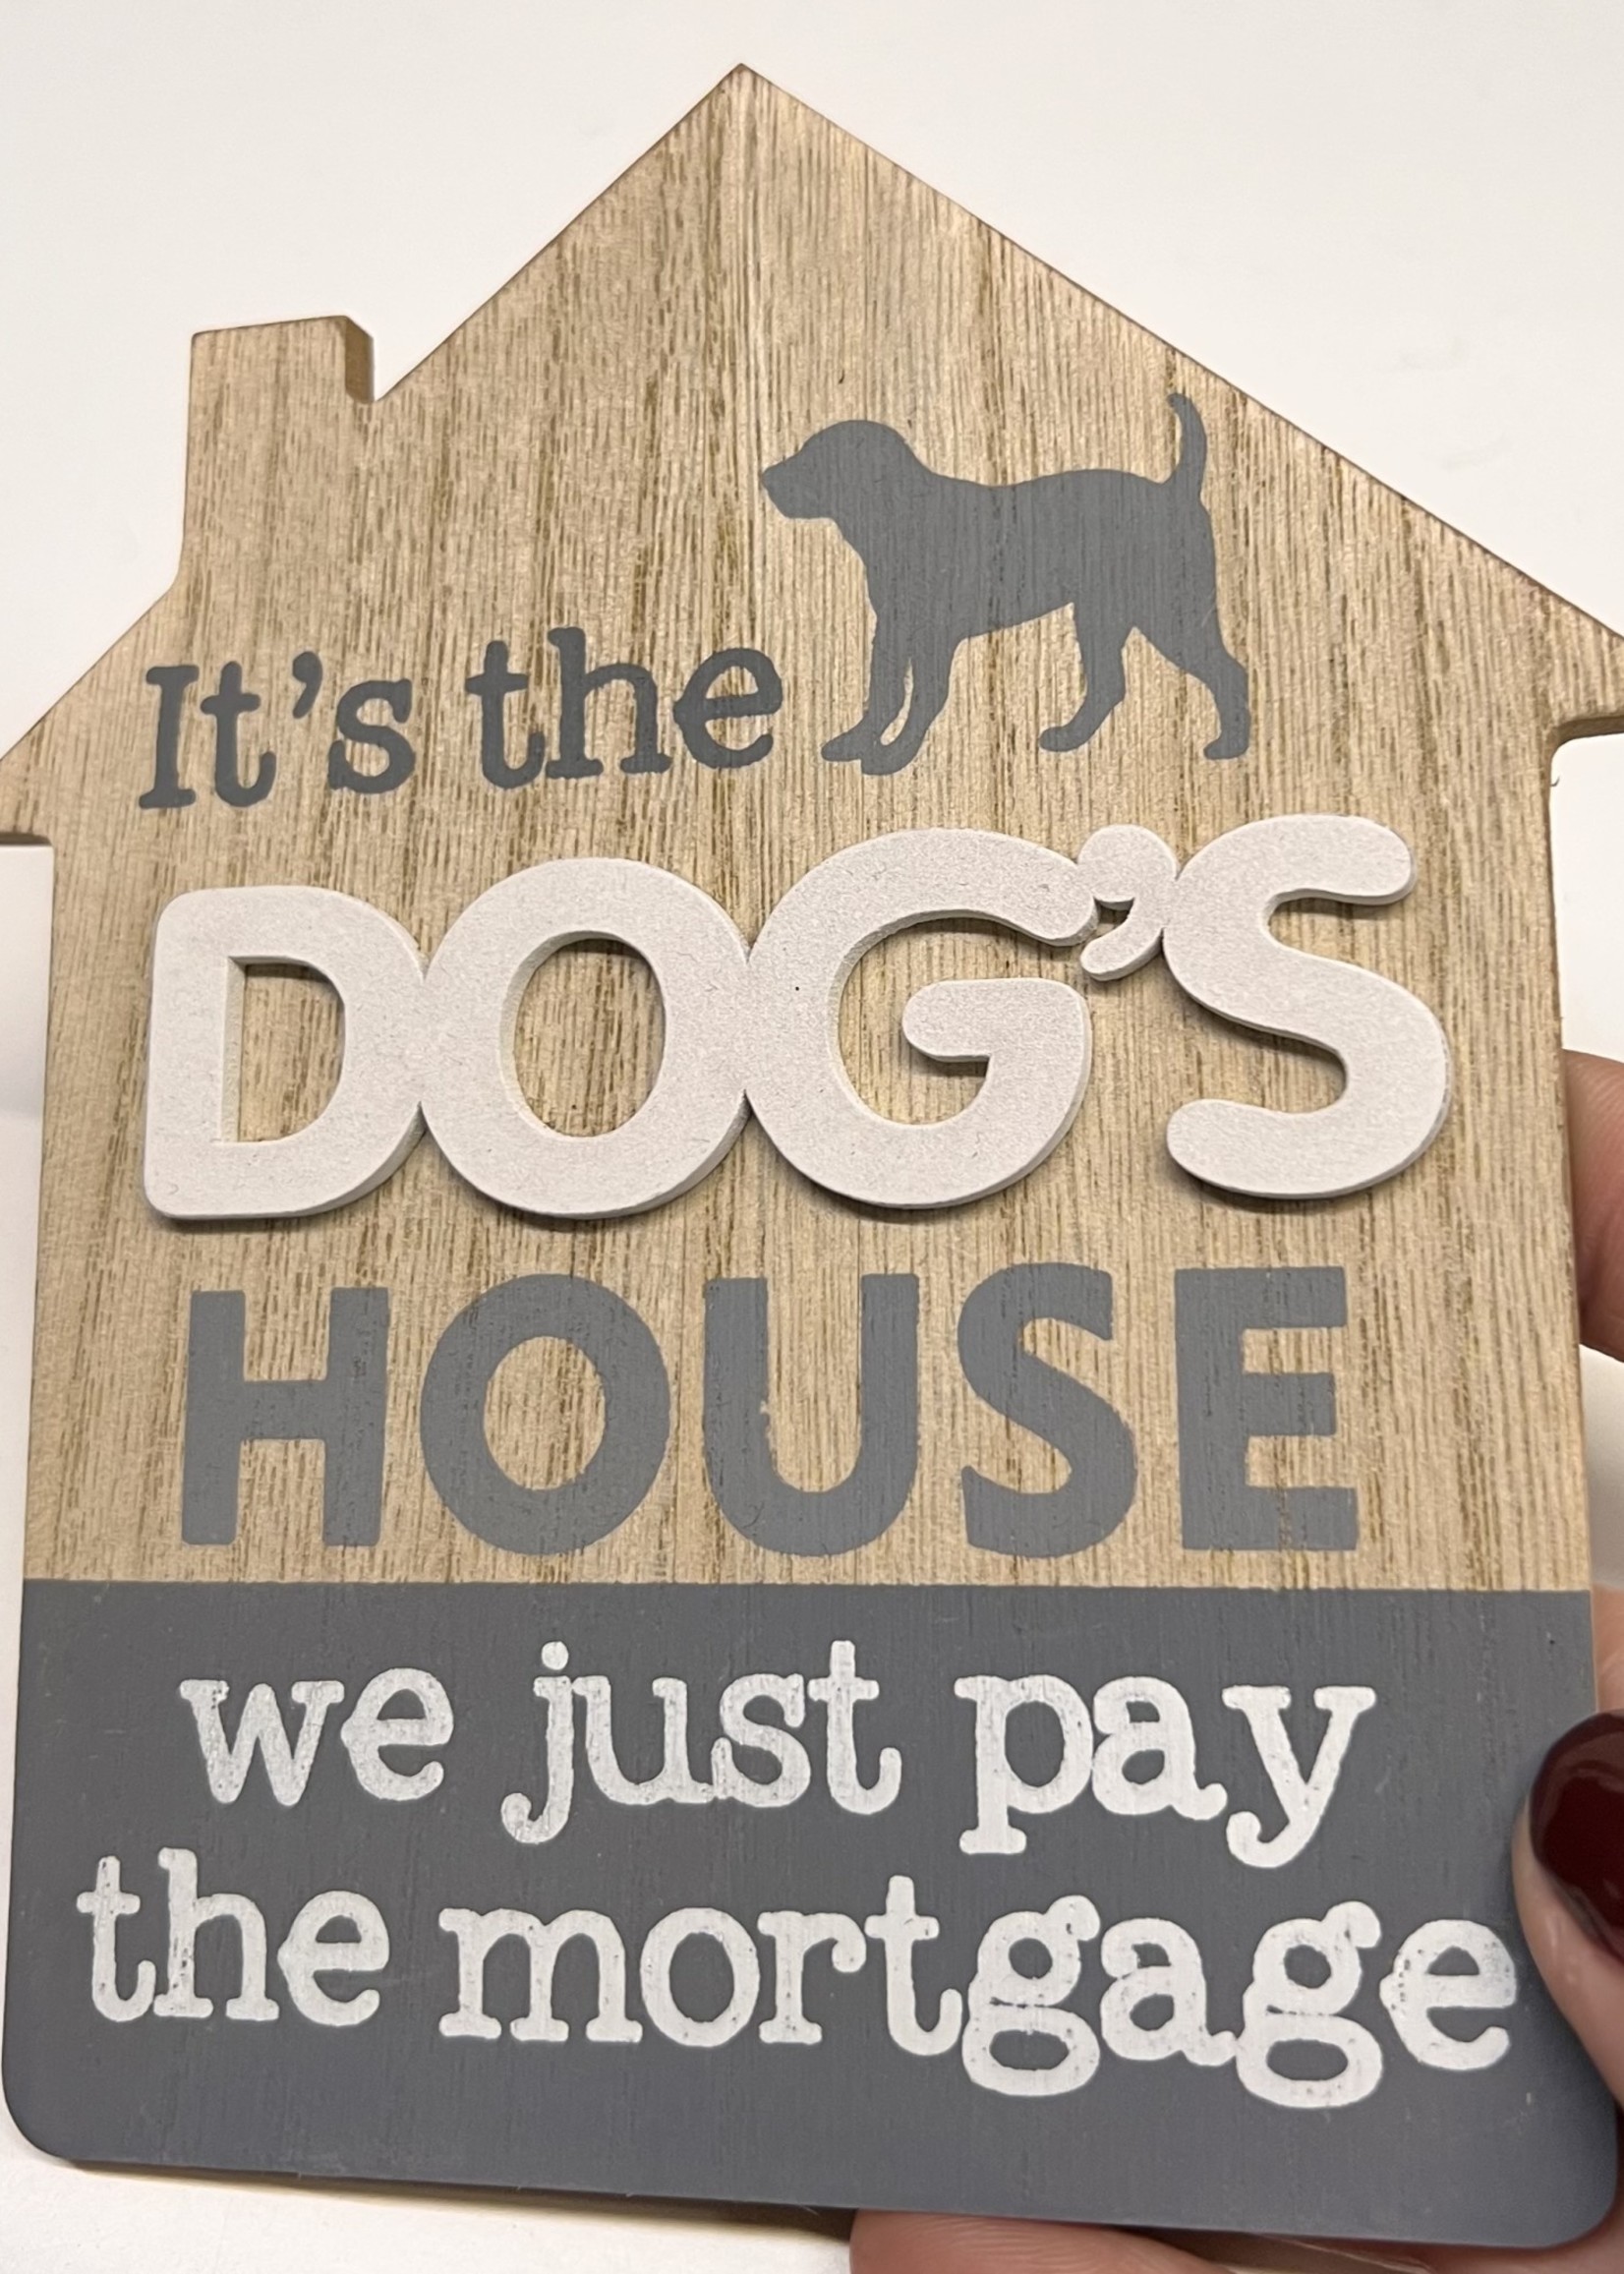 It’s the Dog’s  House we just pay the mortgage  - sign